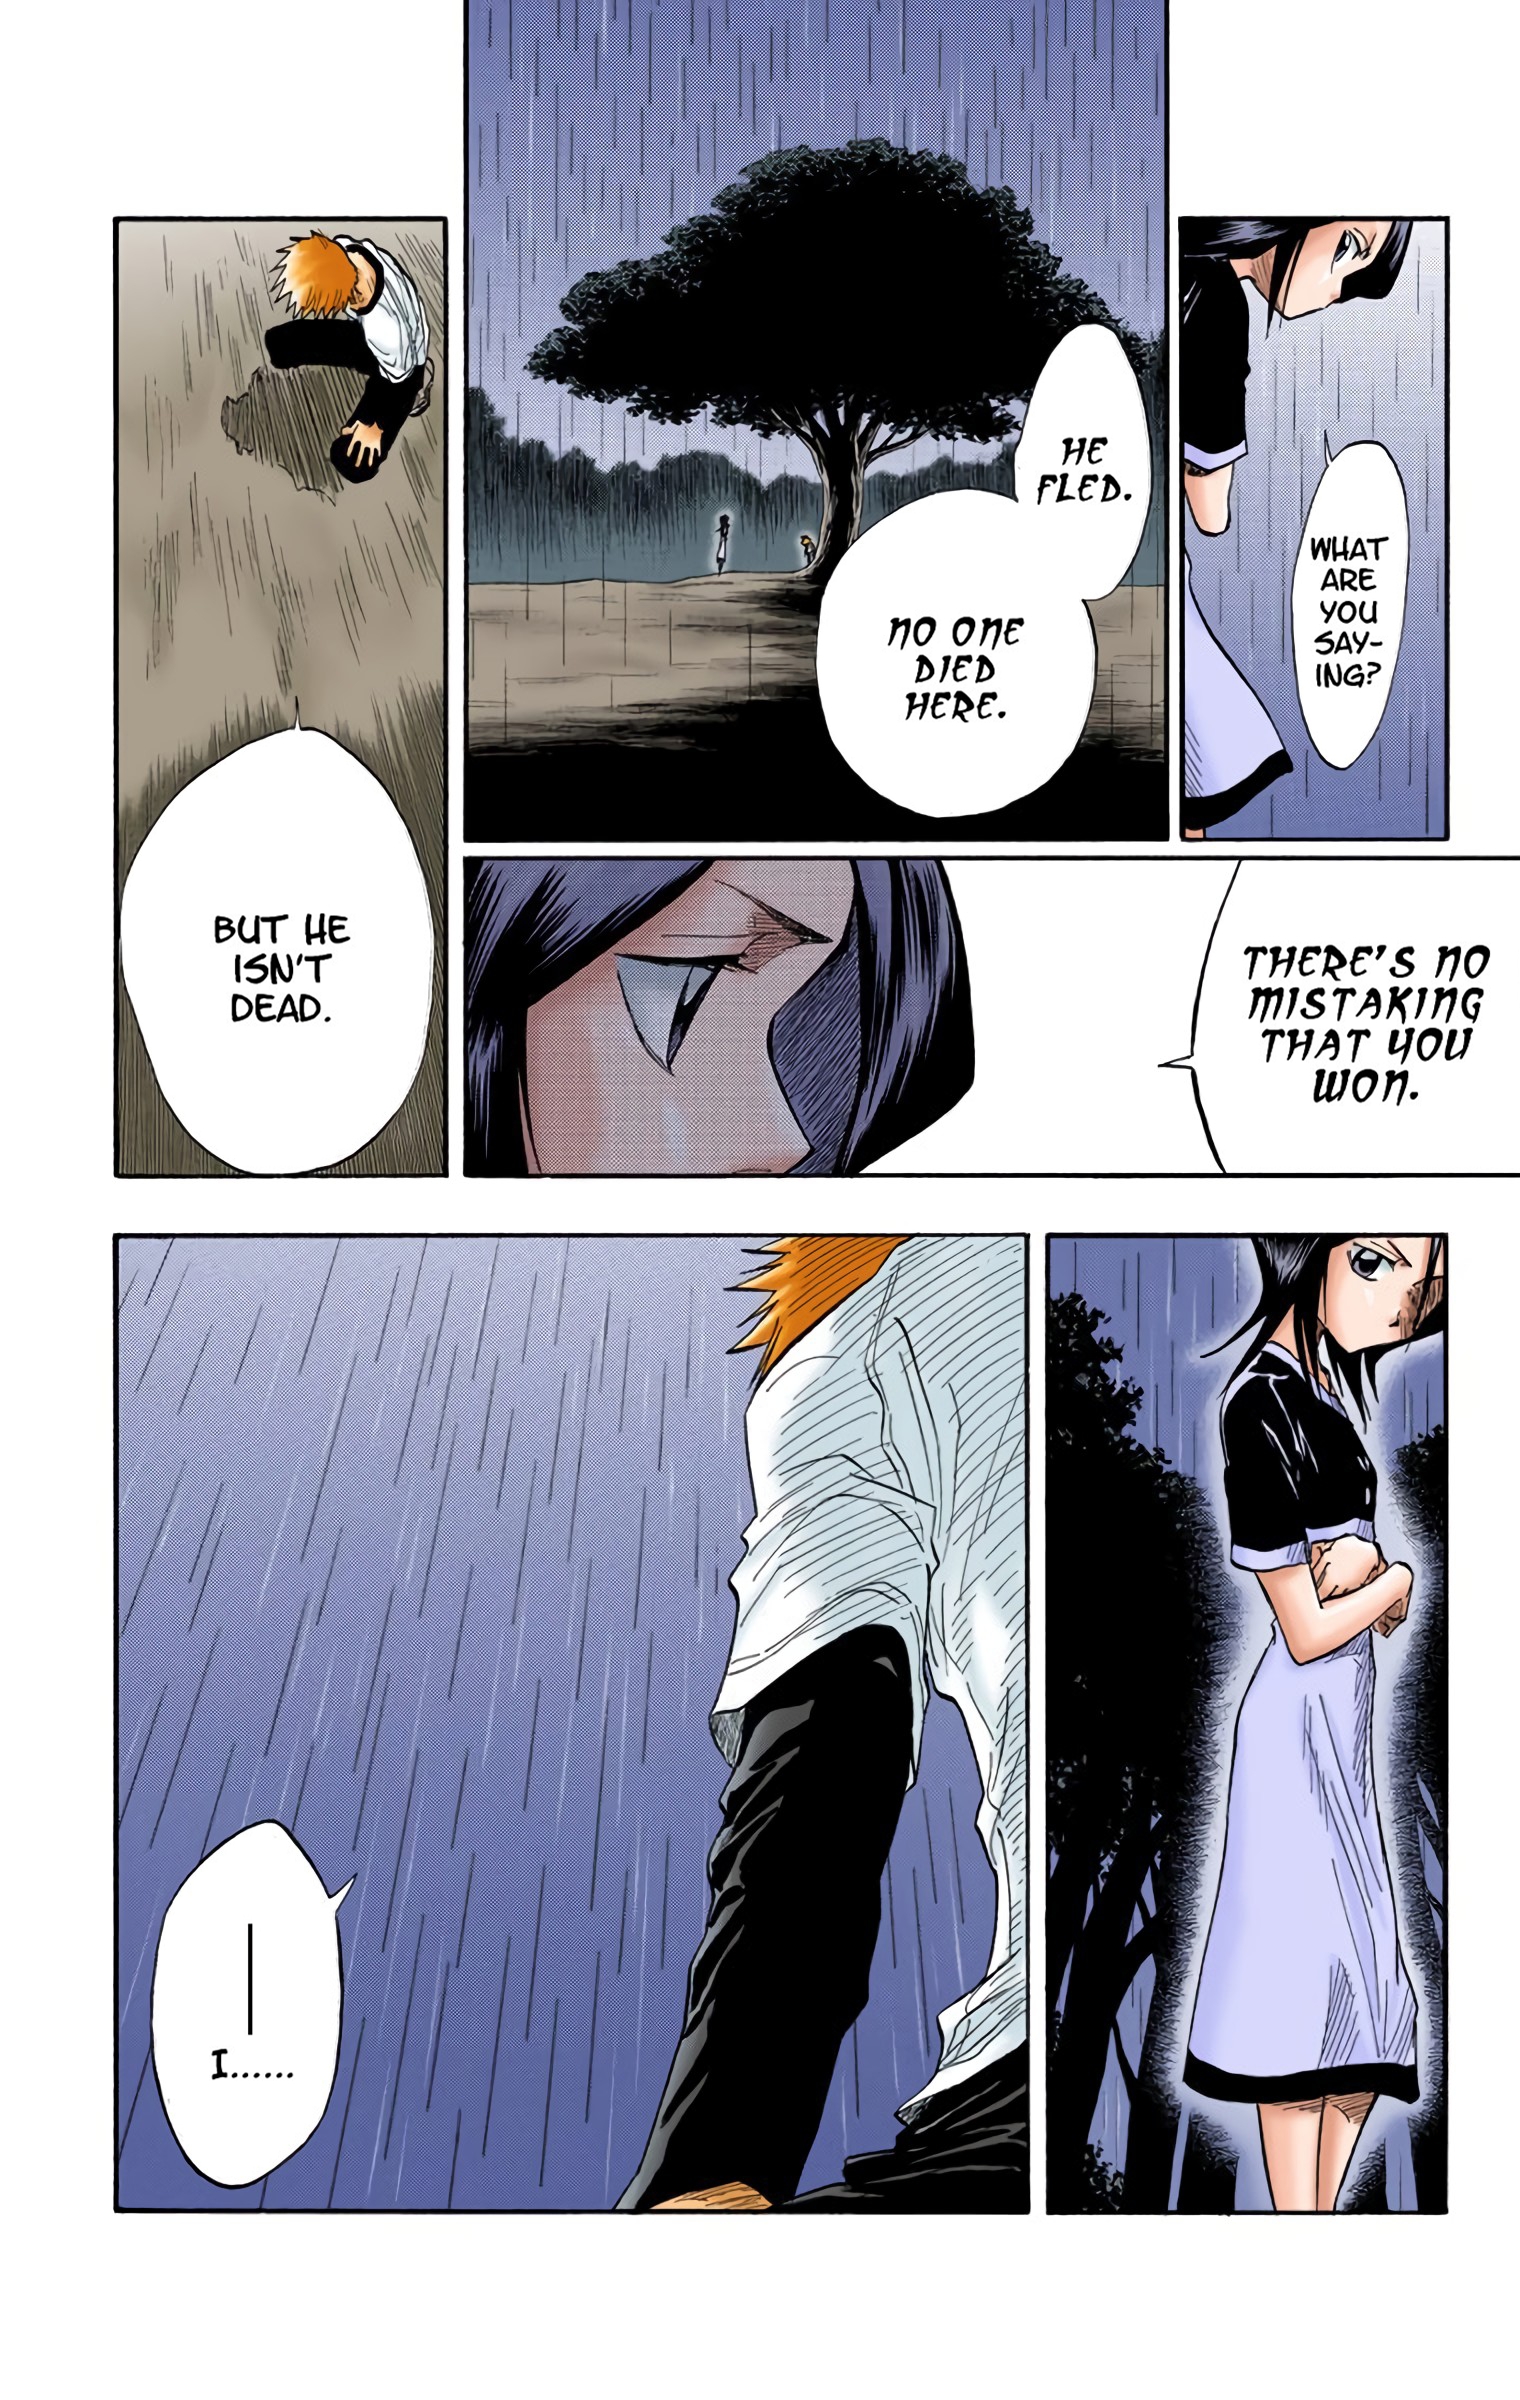 Bleach - Digital Colored Comics Vol.3 Chapter 25: 6/17 Op. 9 A Fighting Boy 2 - Picture 3